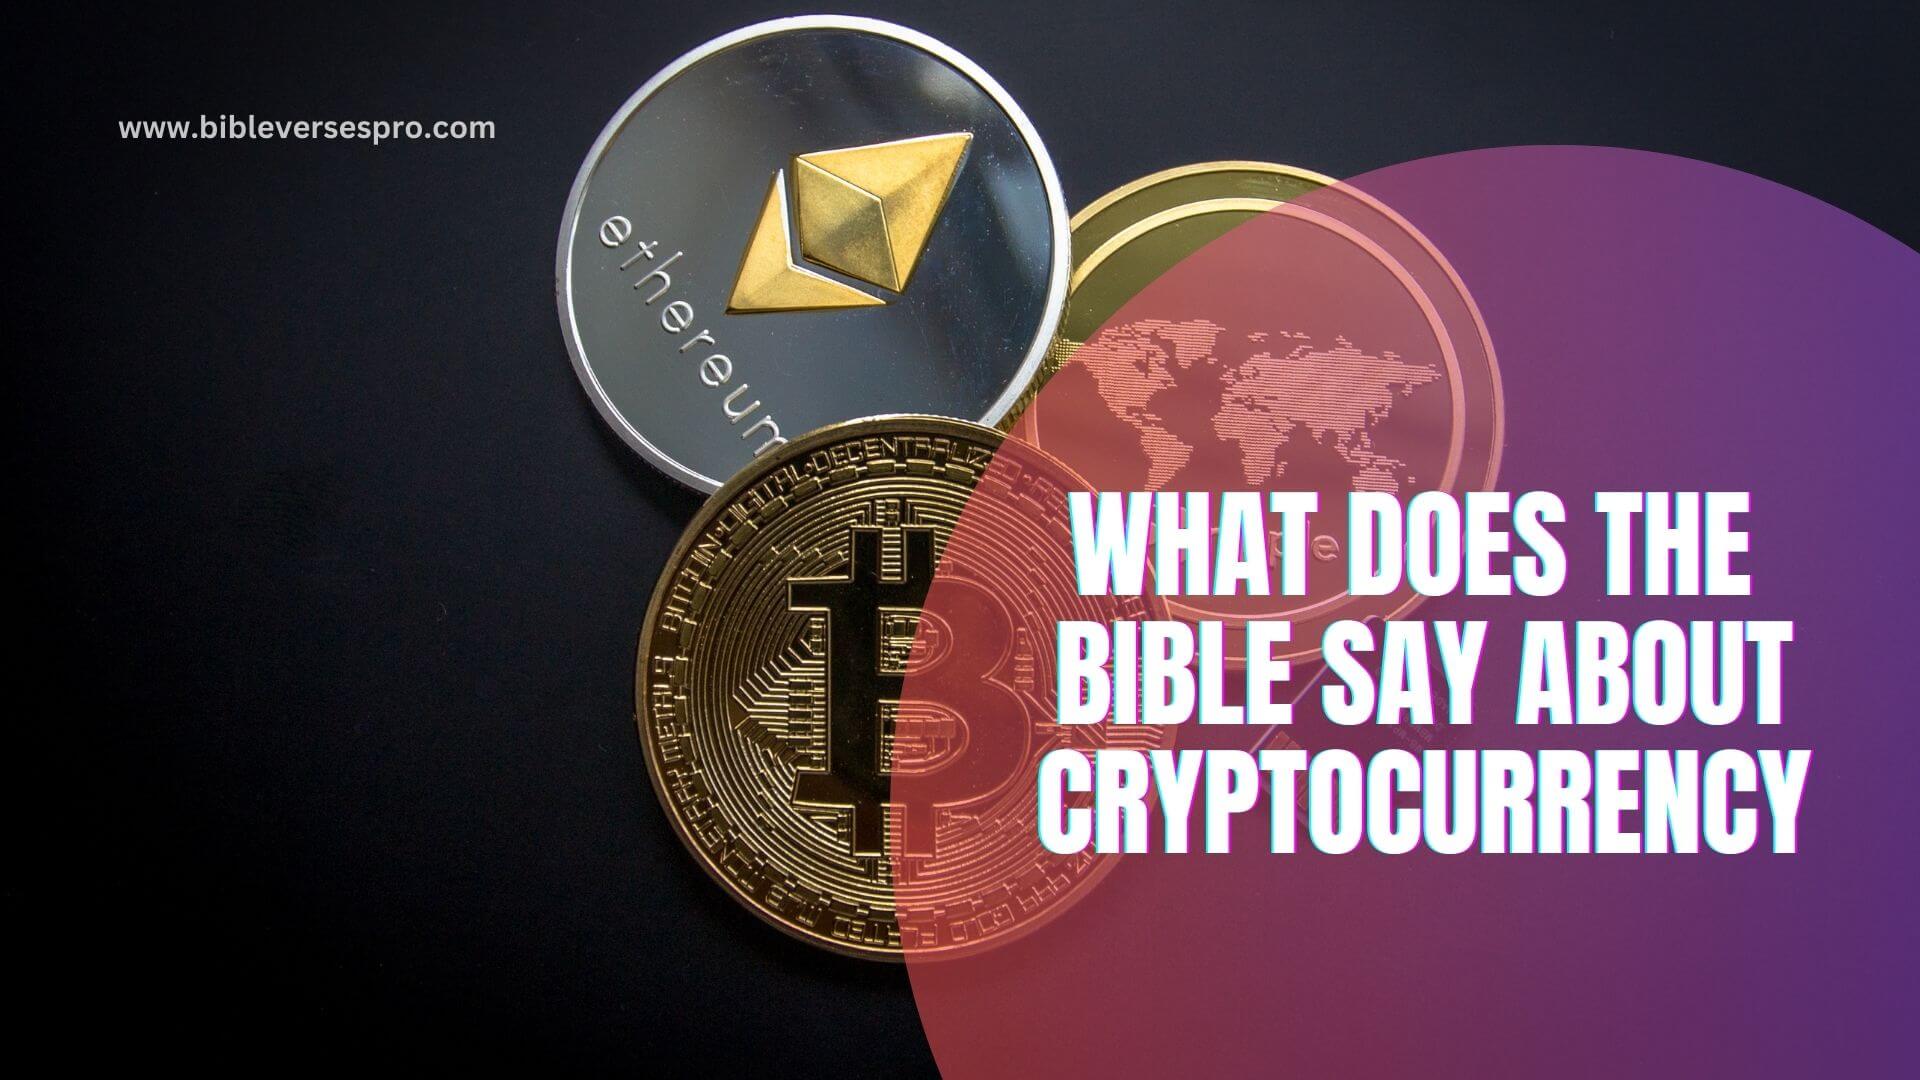 WHAT DOES THE BIBLE SAY ABOUT CRYPTOCURRENCY (1)